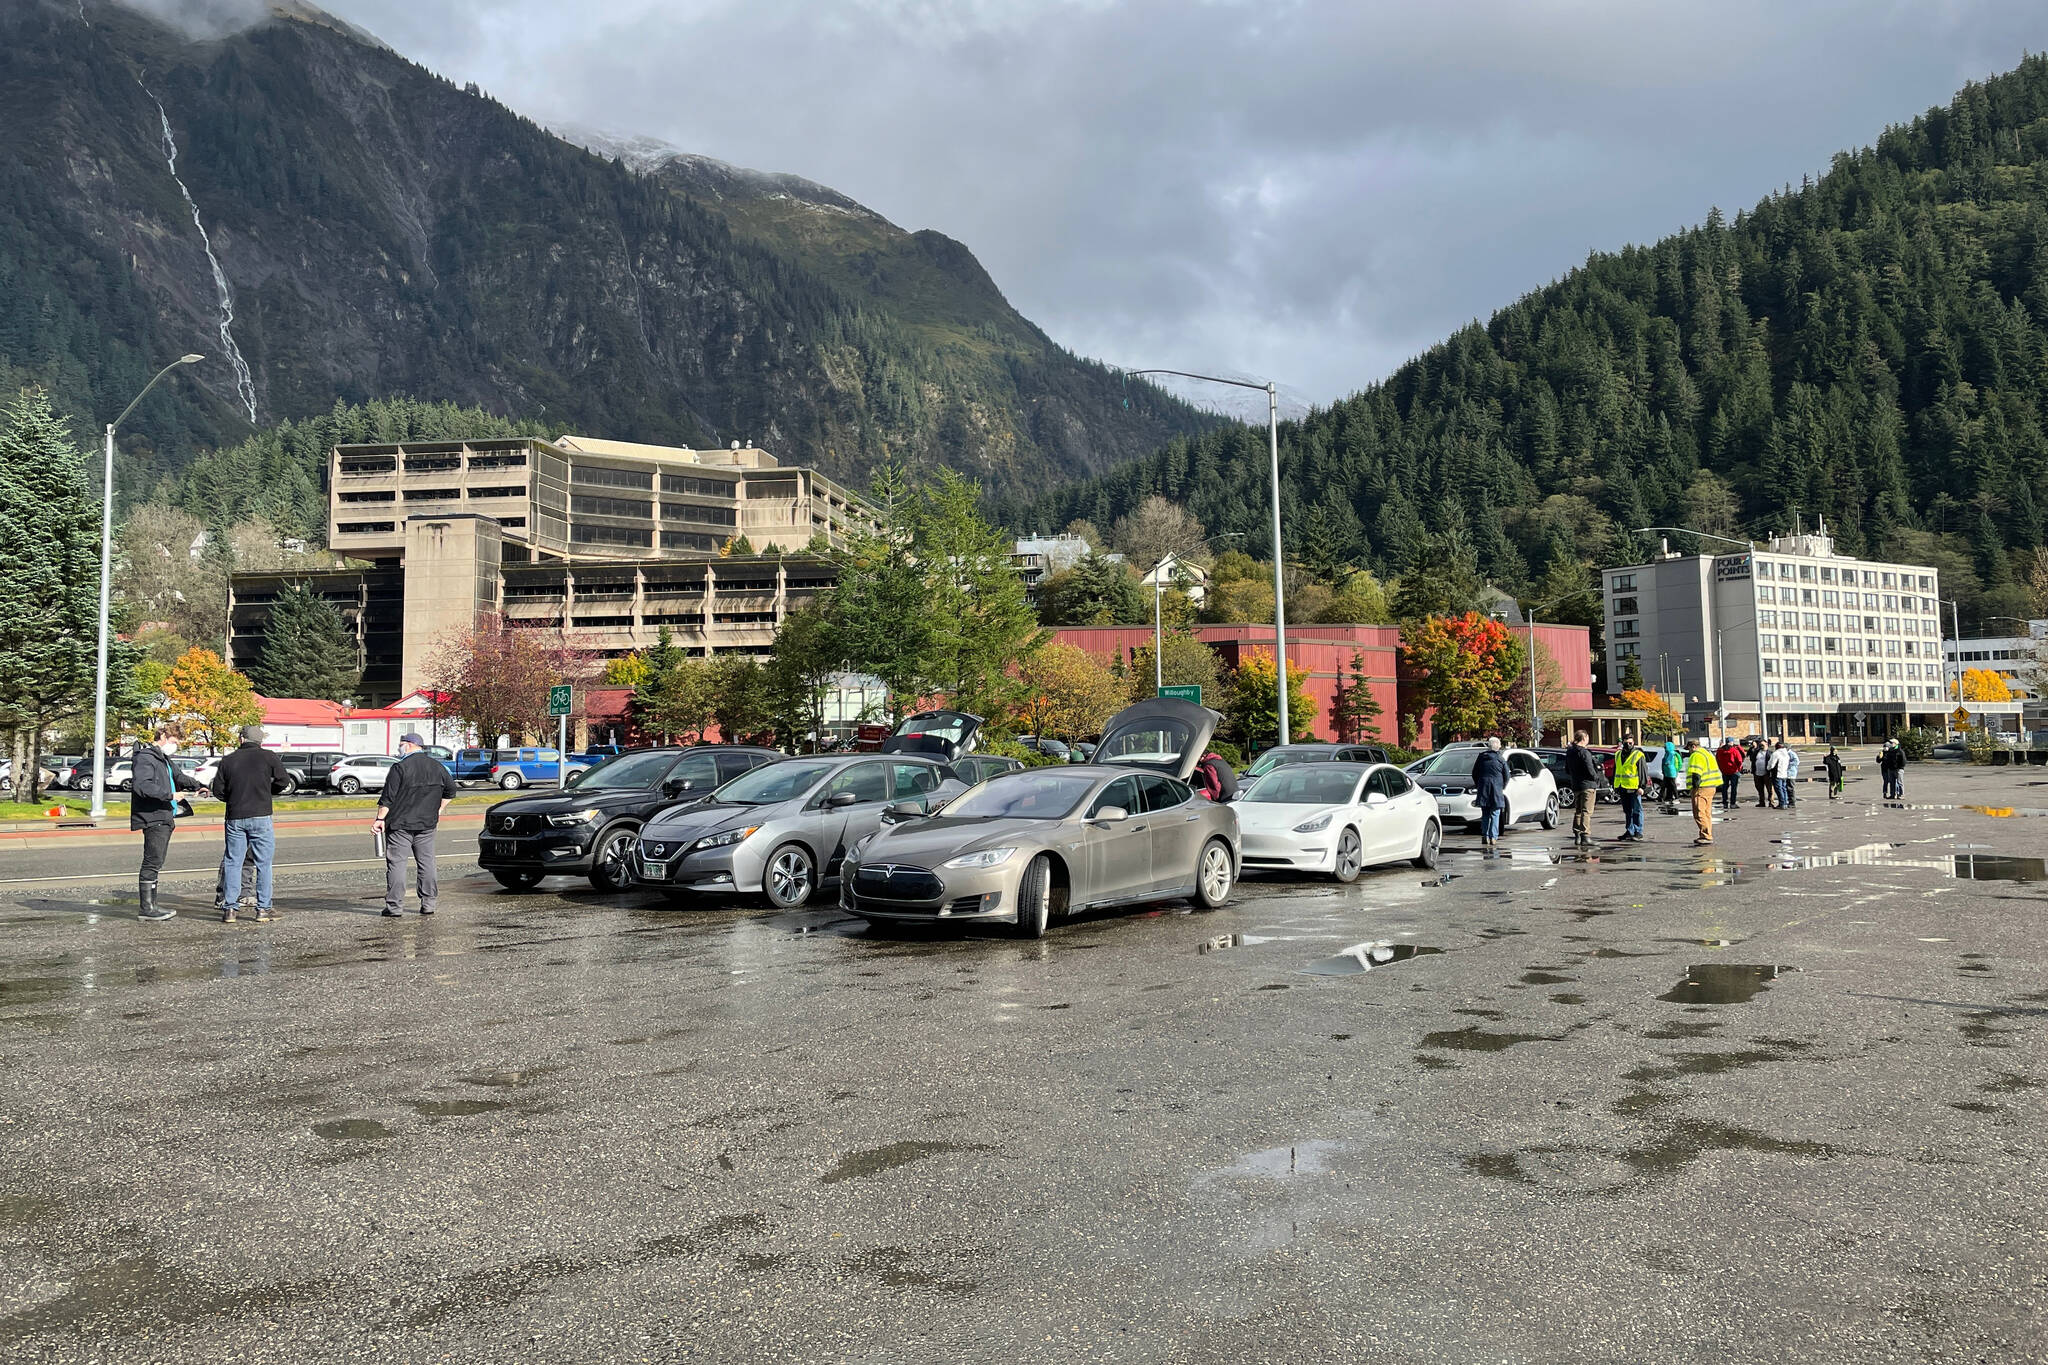 The Juneau Electric Vehicle Association held its 8th annual meet up for National Drive Electric Week on Oct. 2, 2021. (Michael S. Lockett / Juneau Empire)